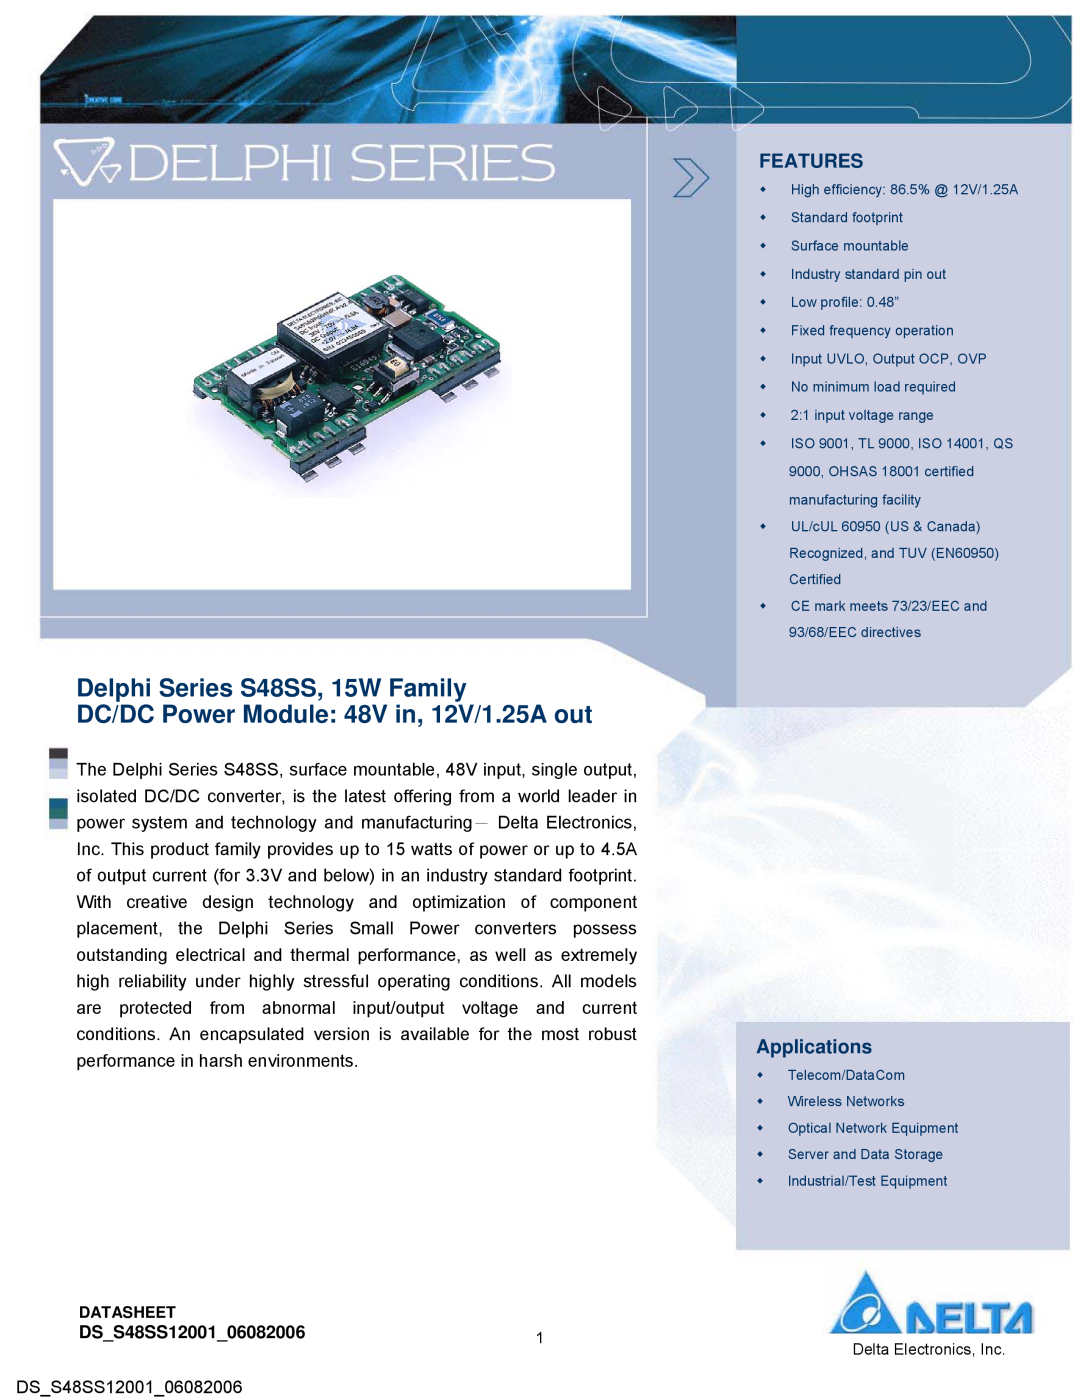 Delta Electronics manual Delphi Series S48SS, 15W Family, DC/DC Power Module 48V in, 12V/1.25A out, Features 